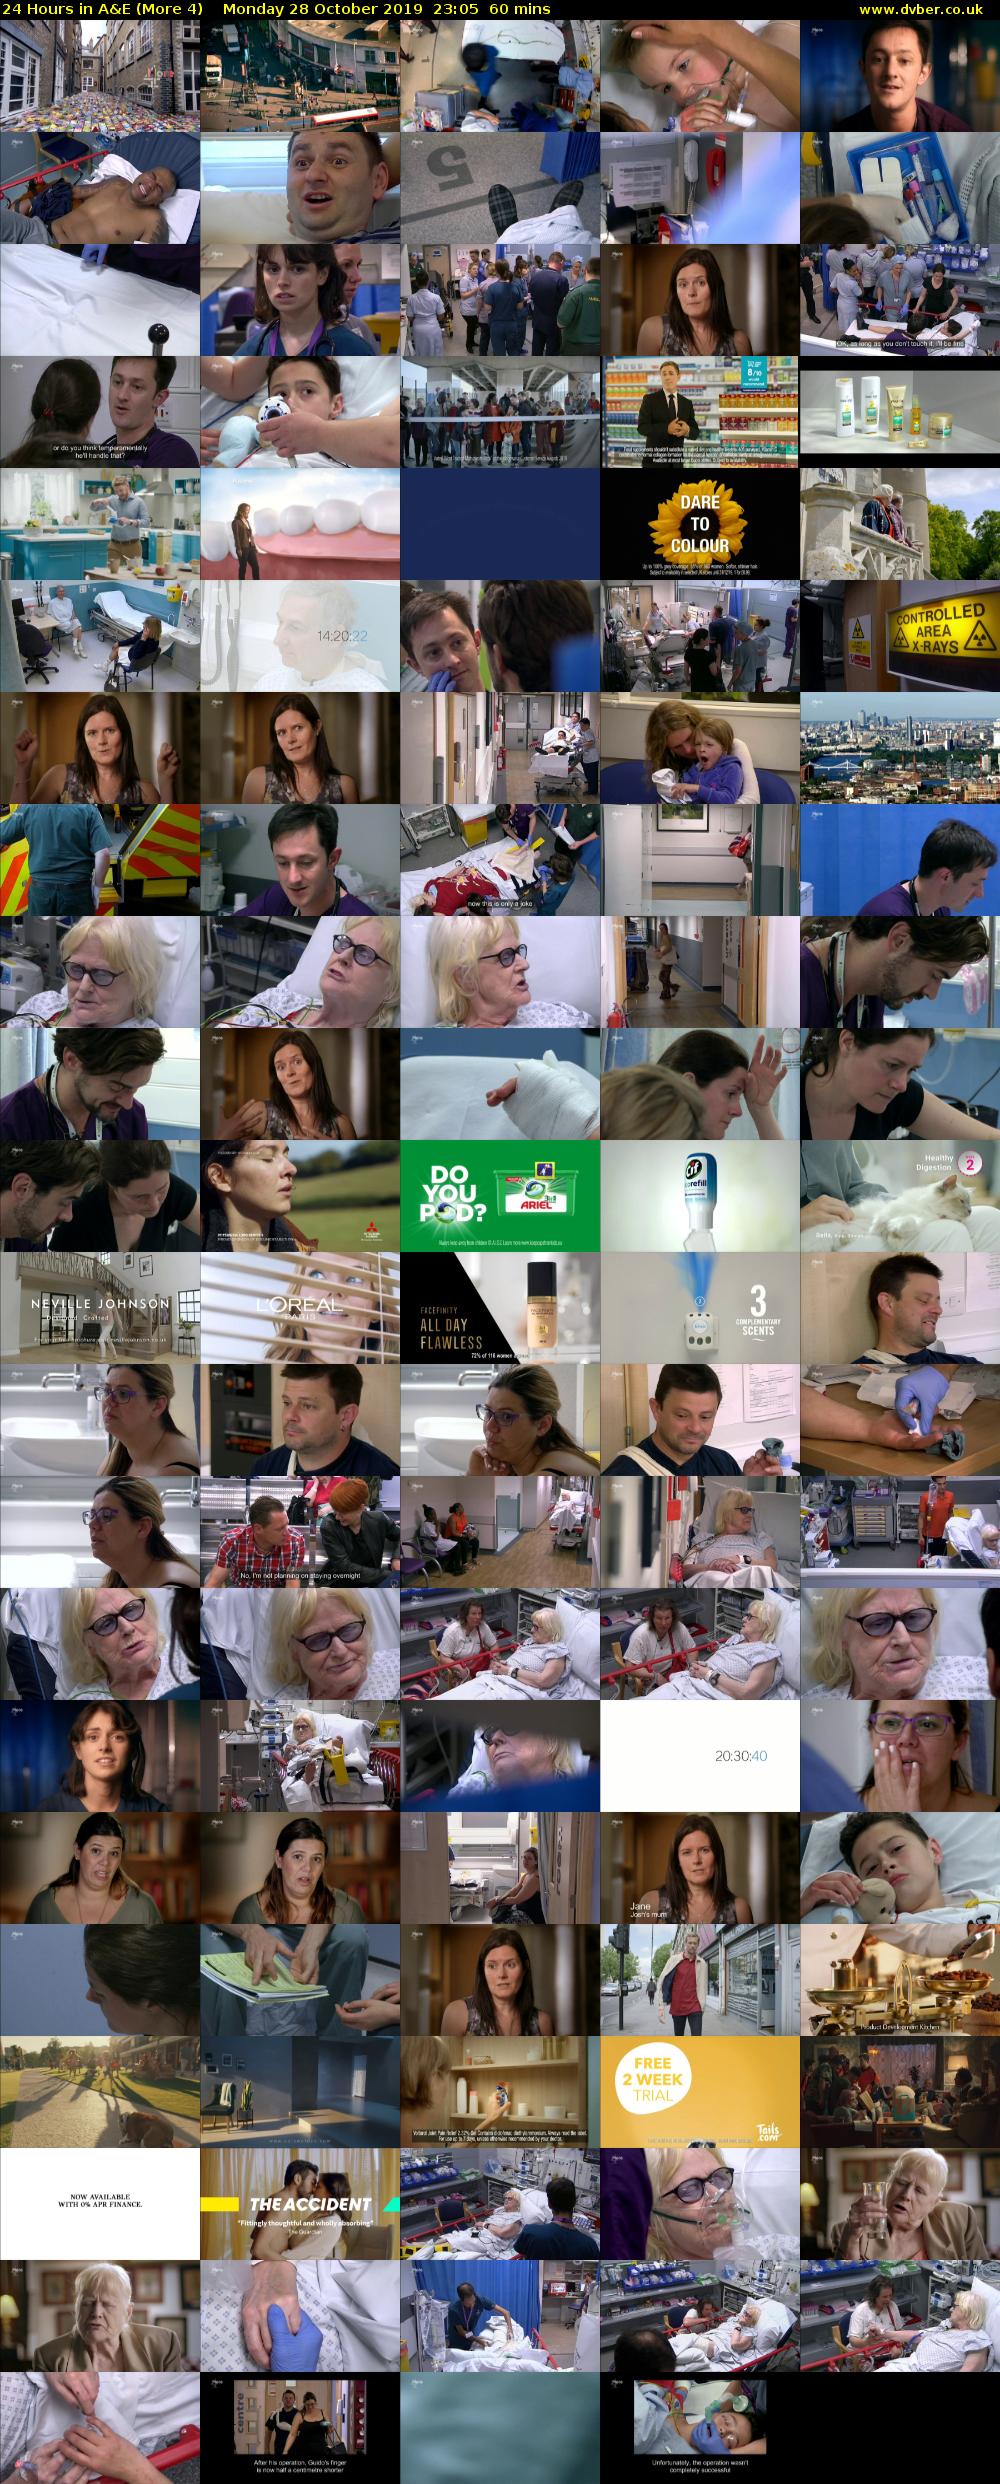 24 Hours in A&E (More 4) Monday 28 October 2019 23:05 - 00:05